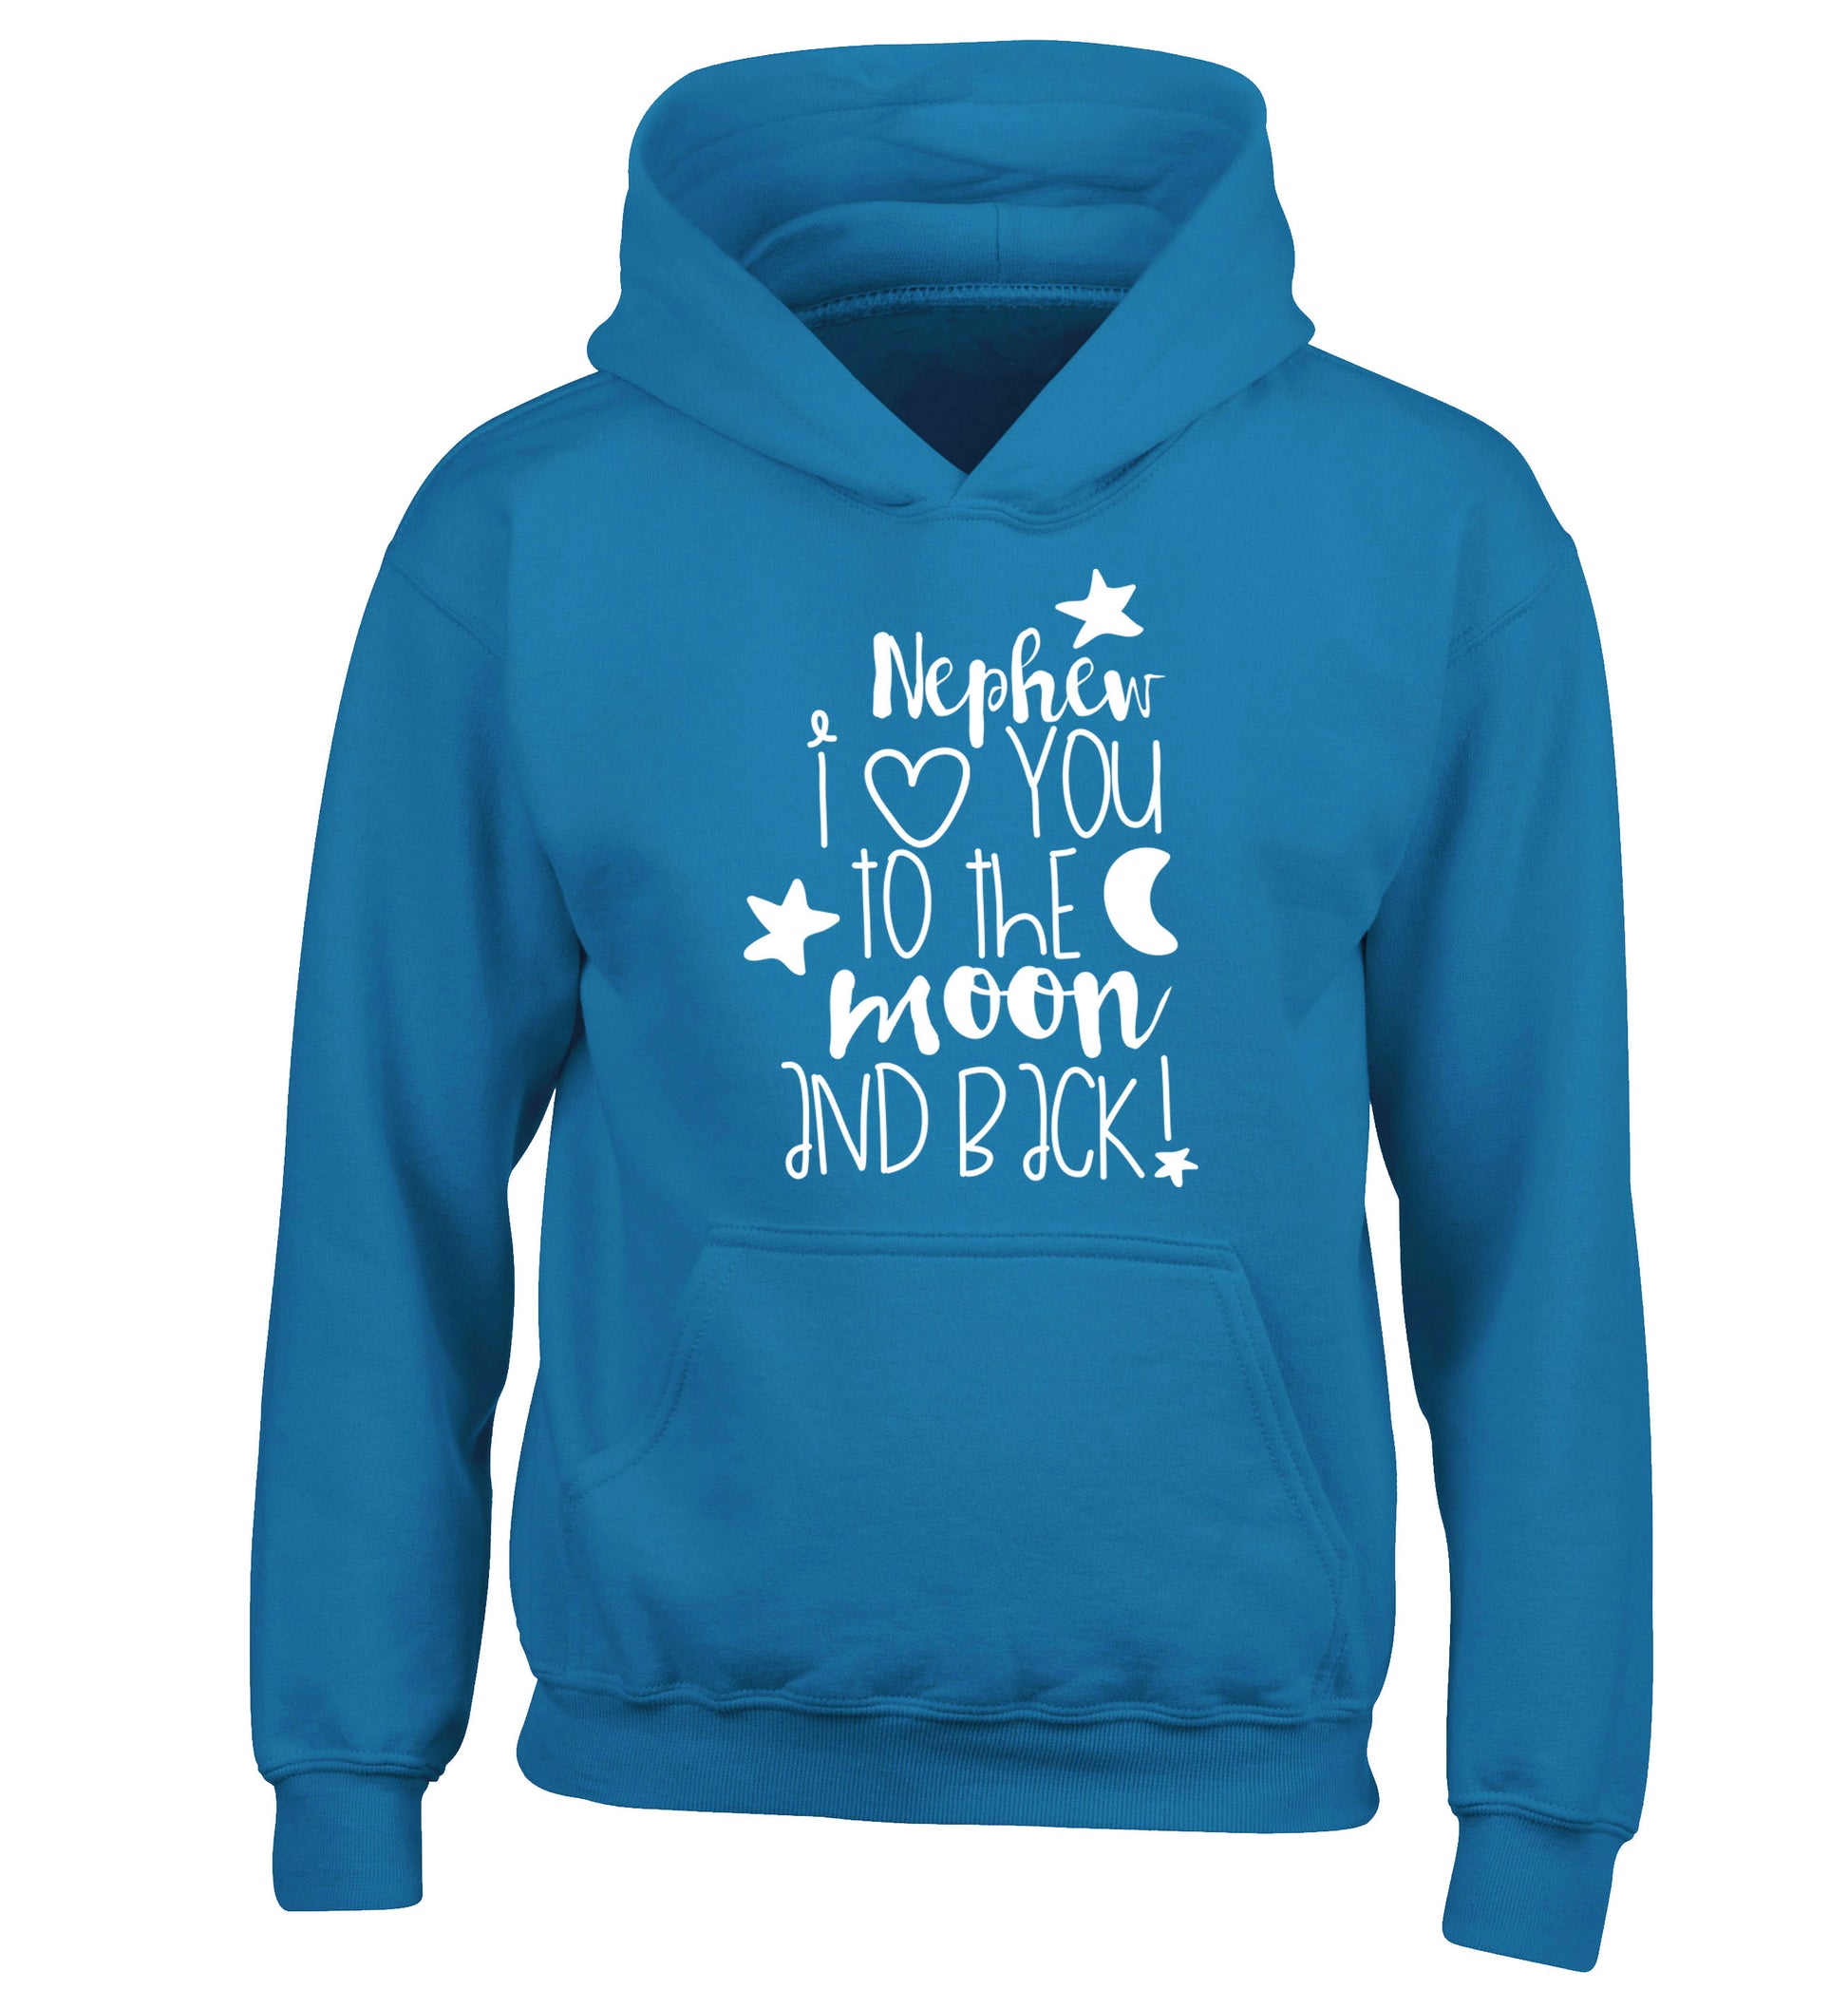 Nephew I love you to the moon and back children's blue hoodie 12-14 Years